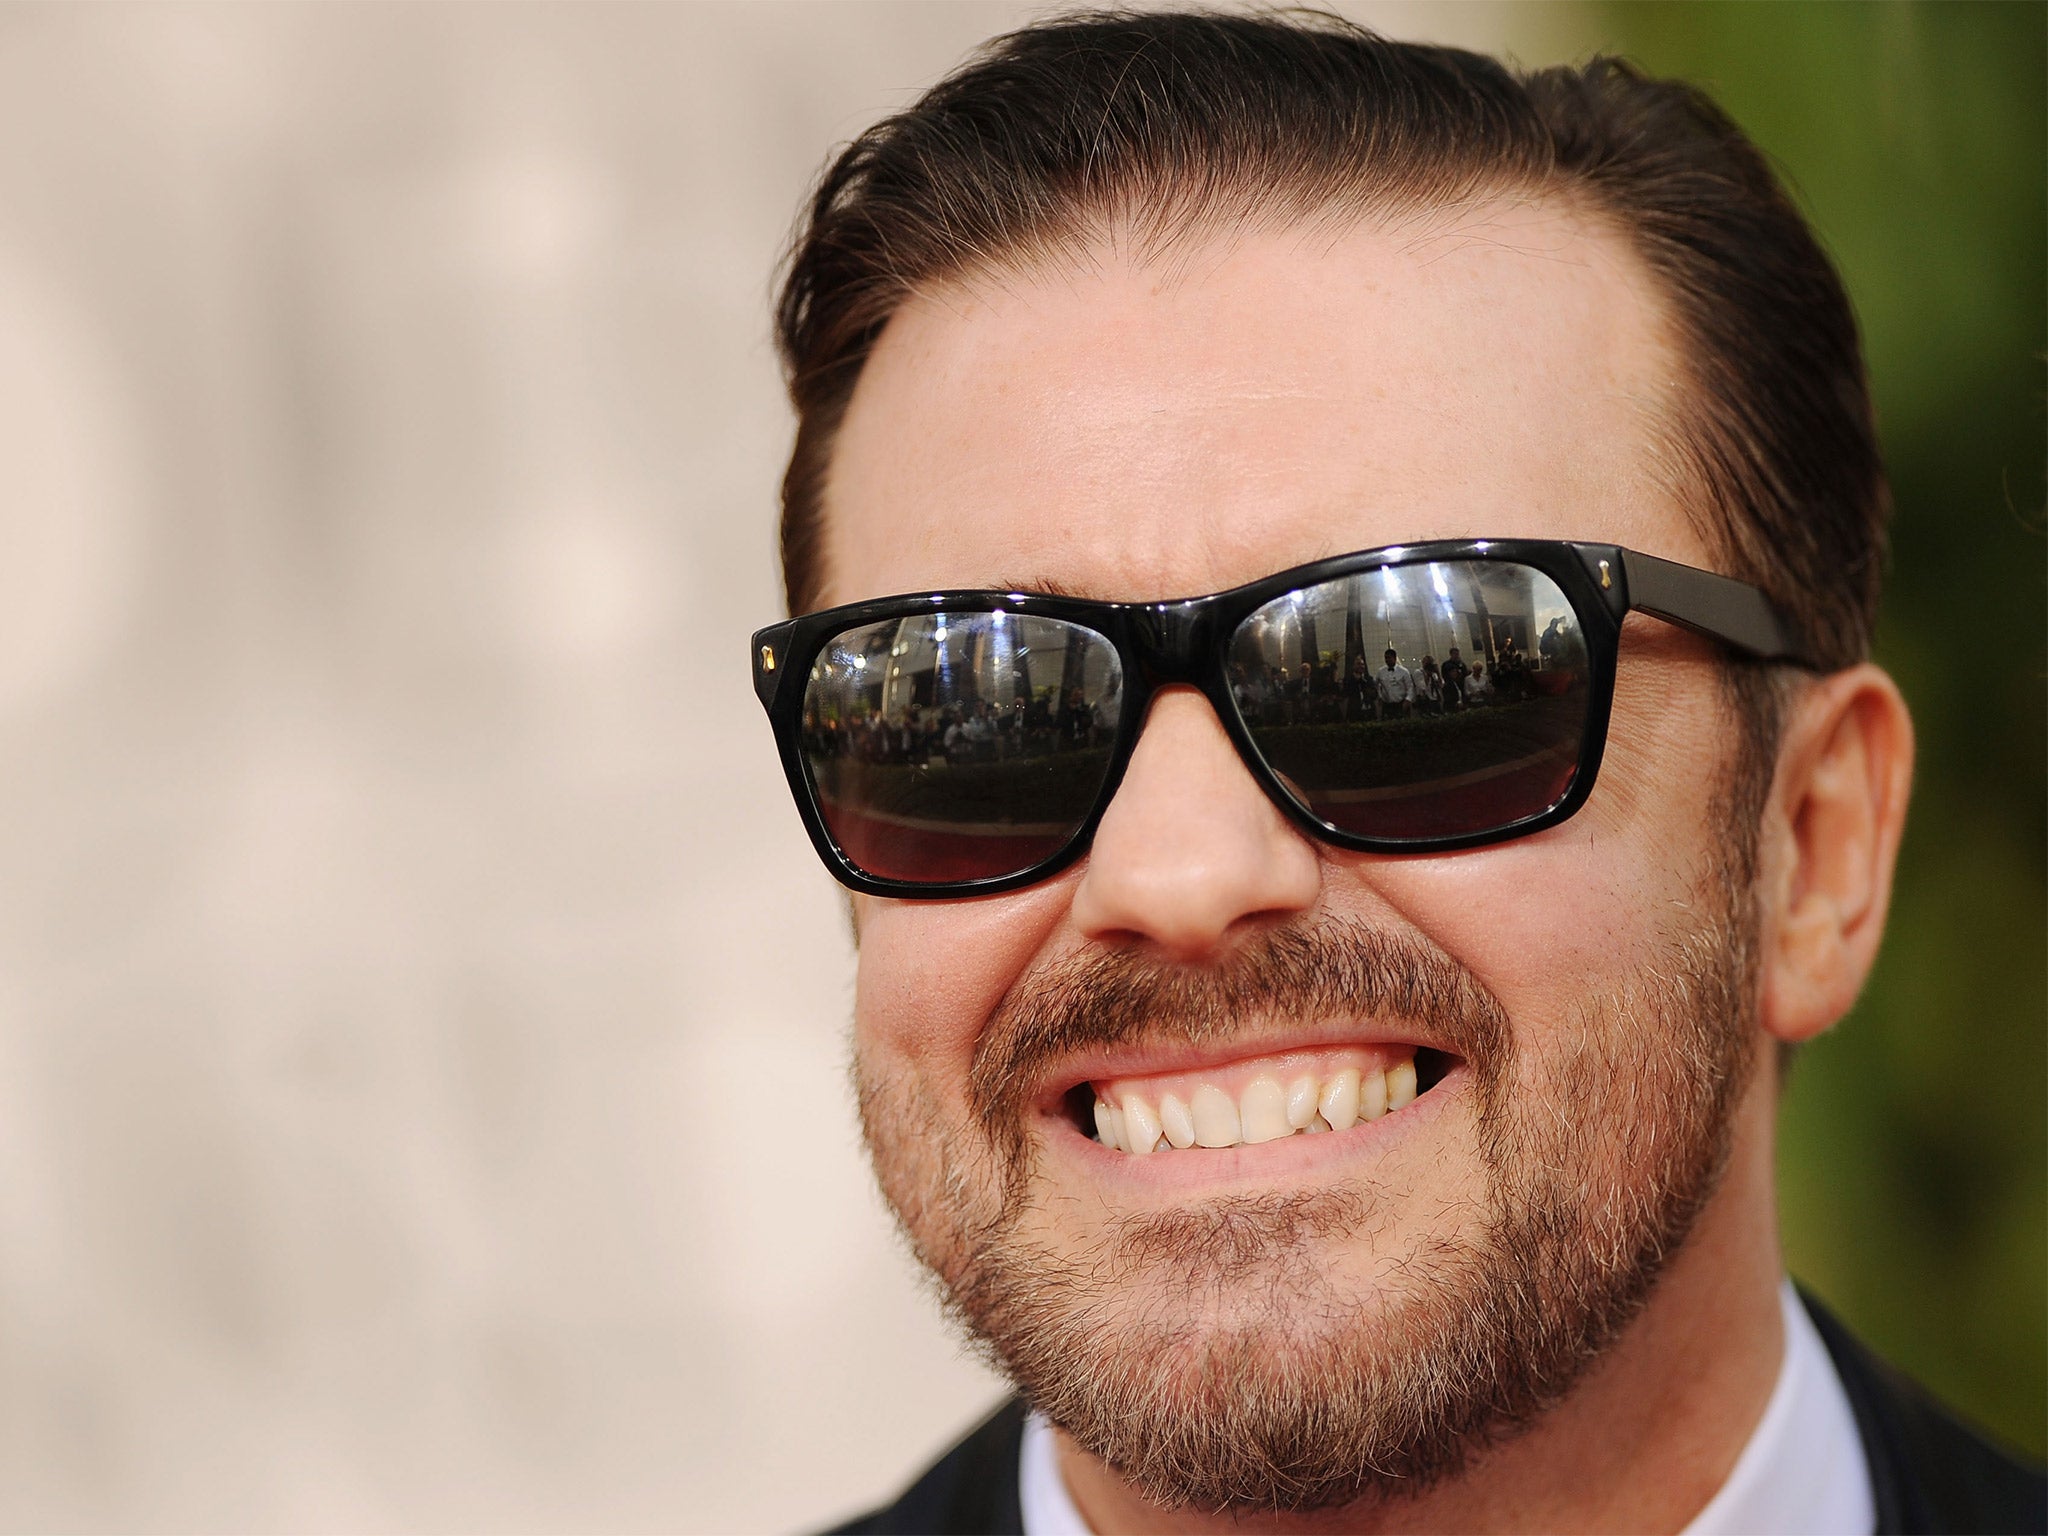 Ricky Gervais said an American journalist praised him for wearing an awful set of false teeth at a film launch, even though he wasn’t